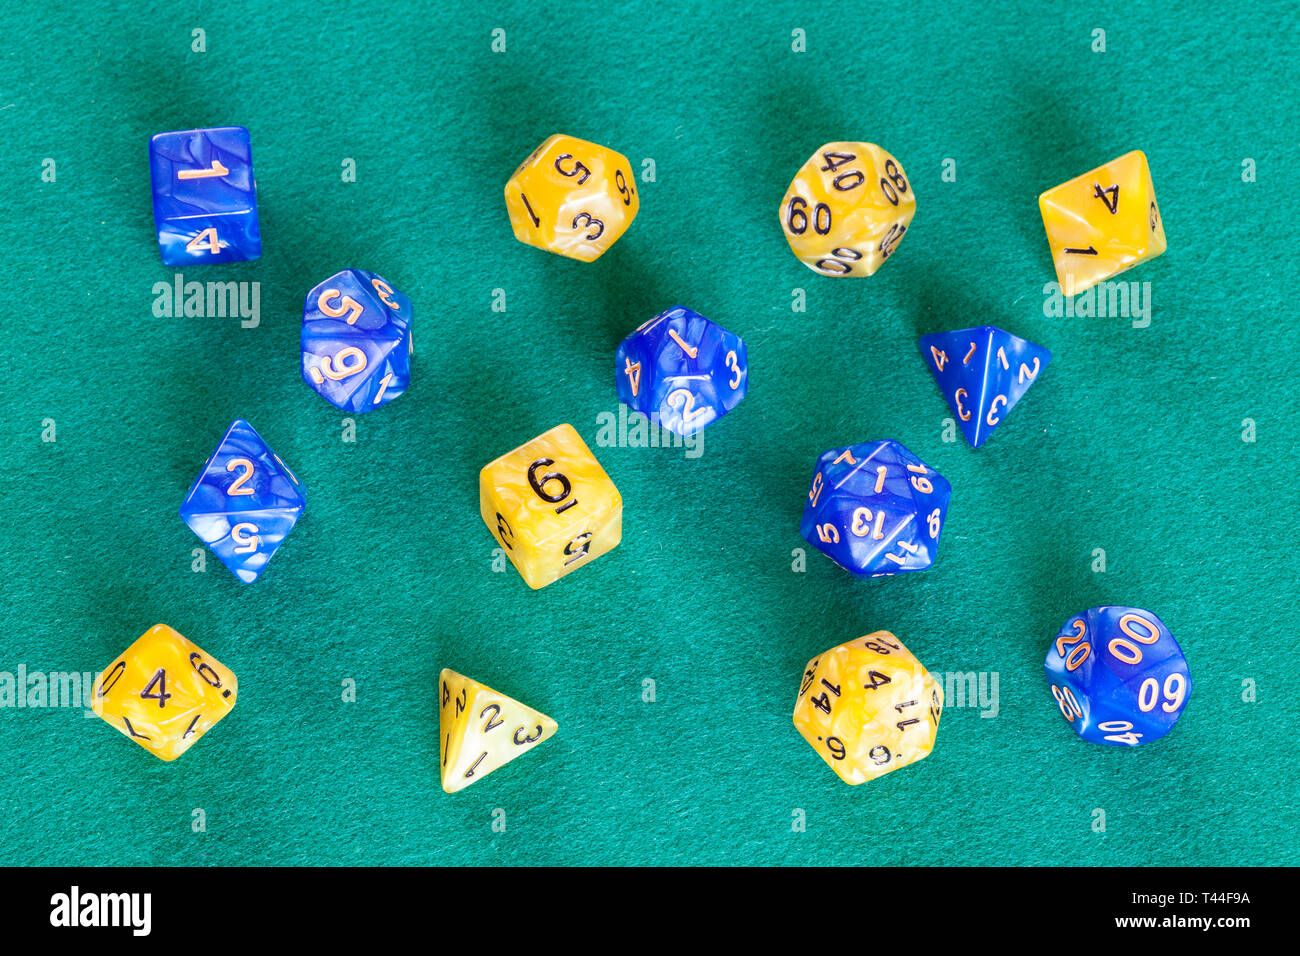 two sets of polyhedral dices for Dungeons and Dragons board game playing on green baize table Stock Photo